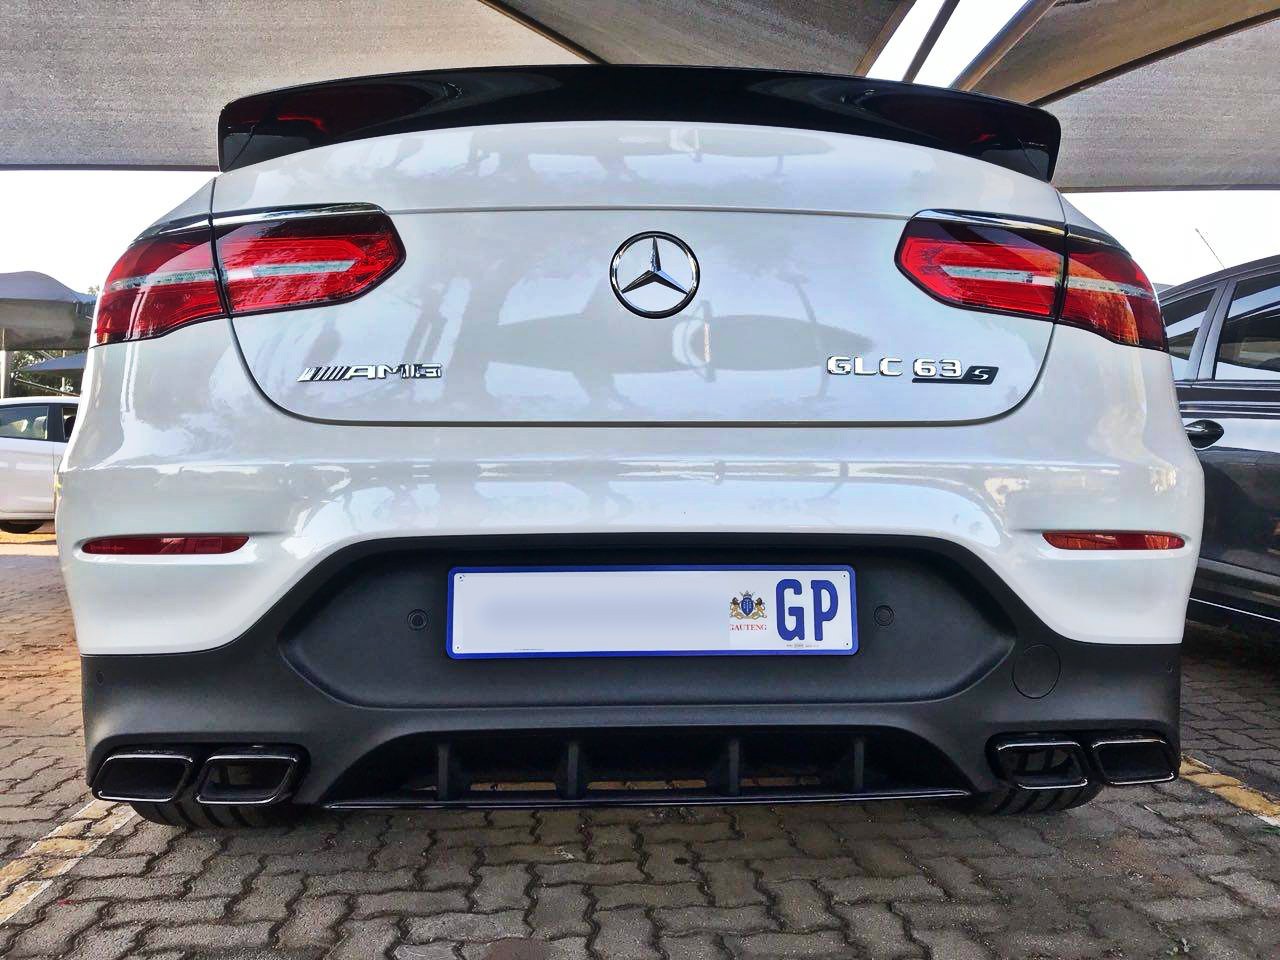 Mercedes Amg Glc 63 S 4matic South African Pricing